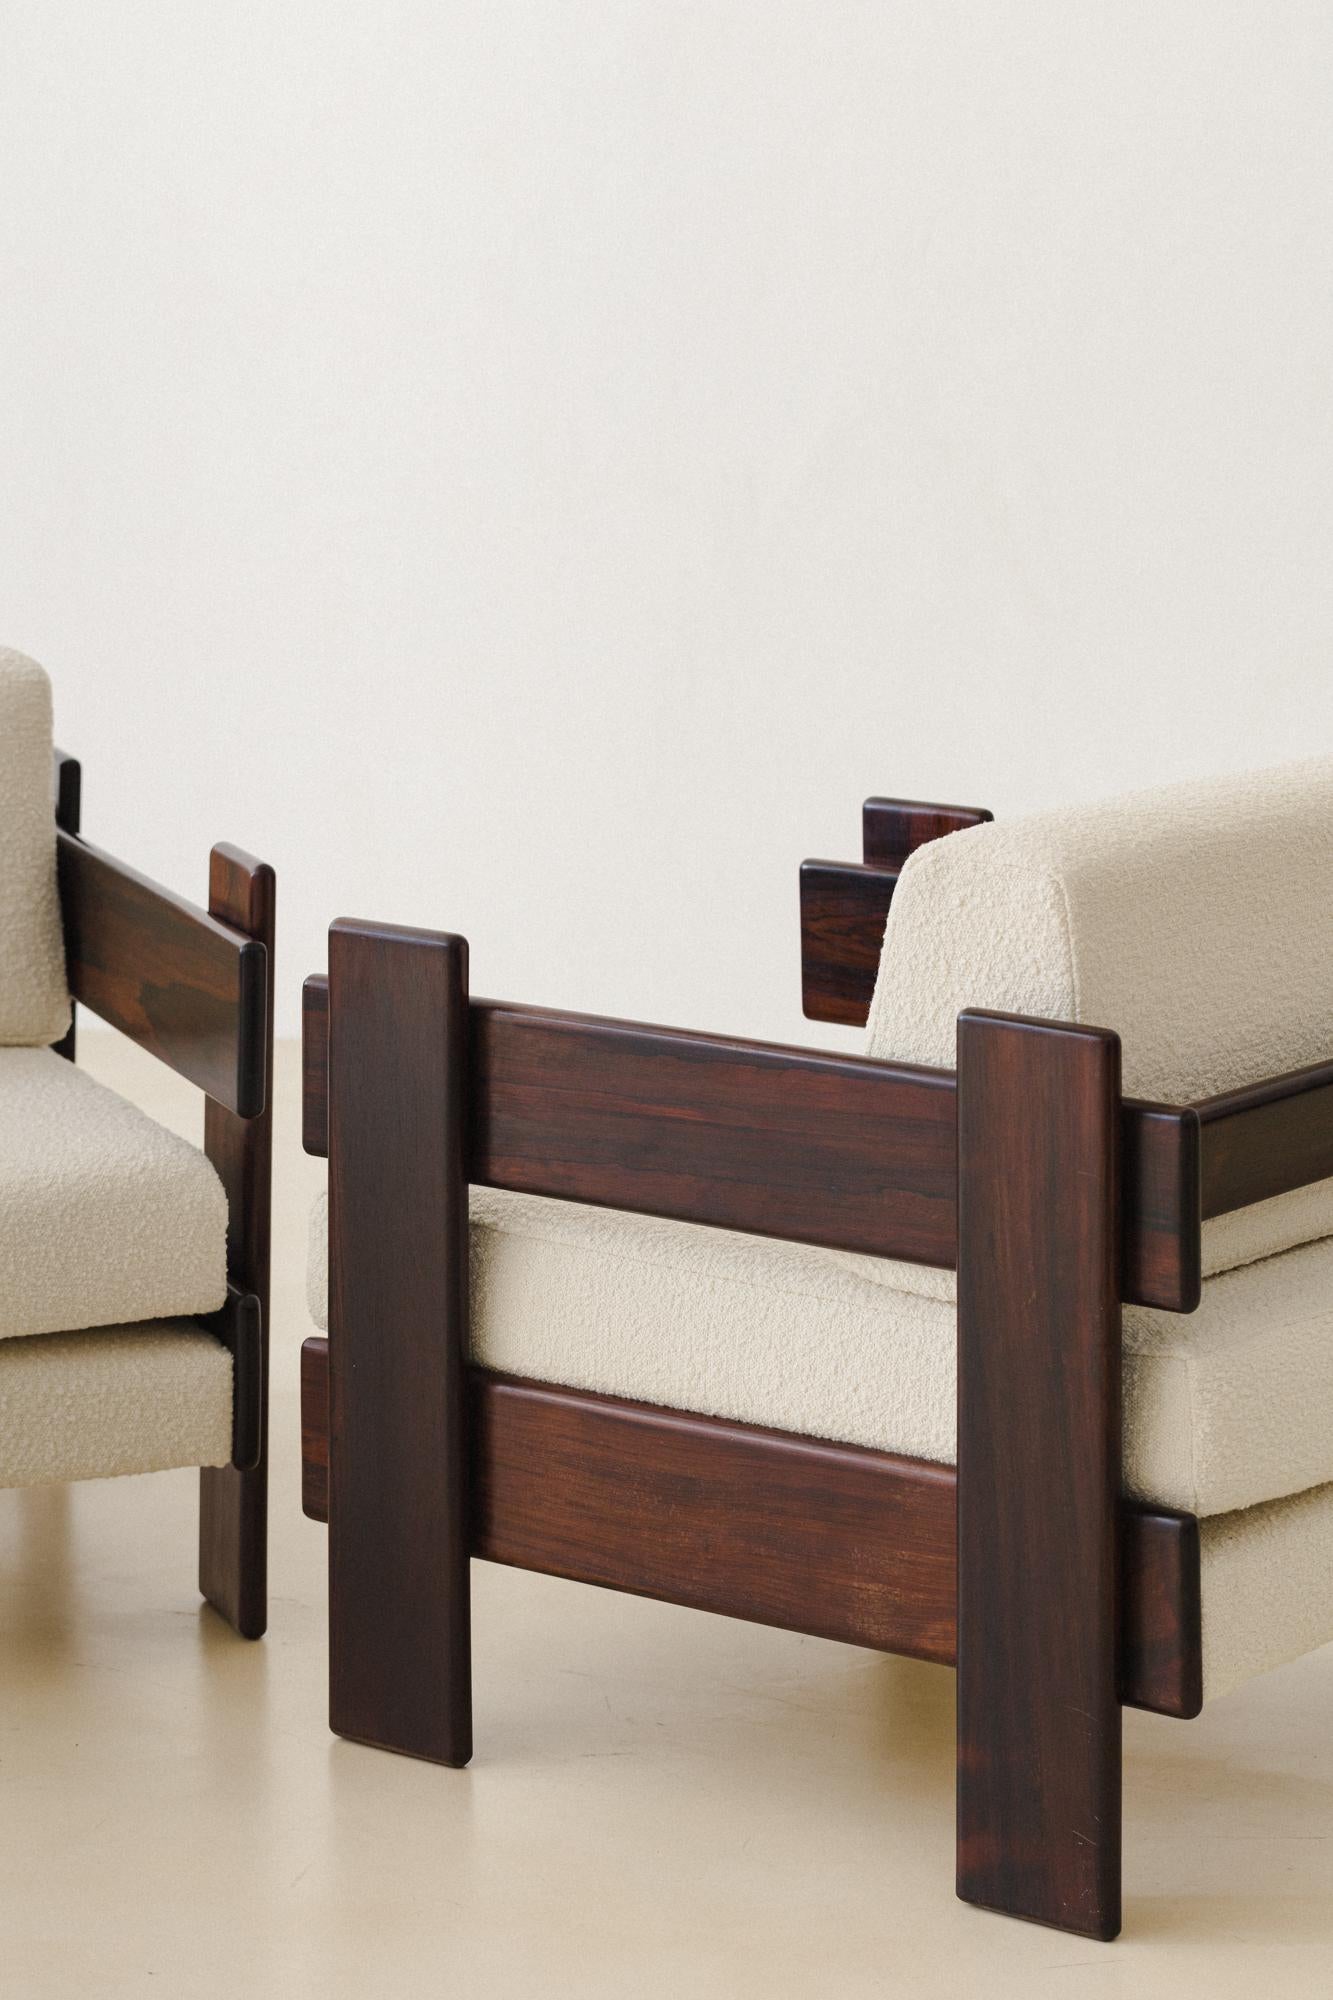 Mid-Century Modern Brazilian Midcentury Design, Solid Rosewood Armchairs by Casulo, 1960s For Sale